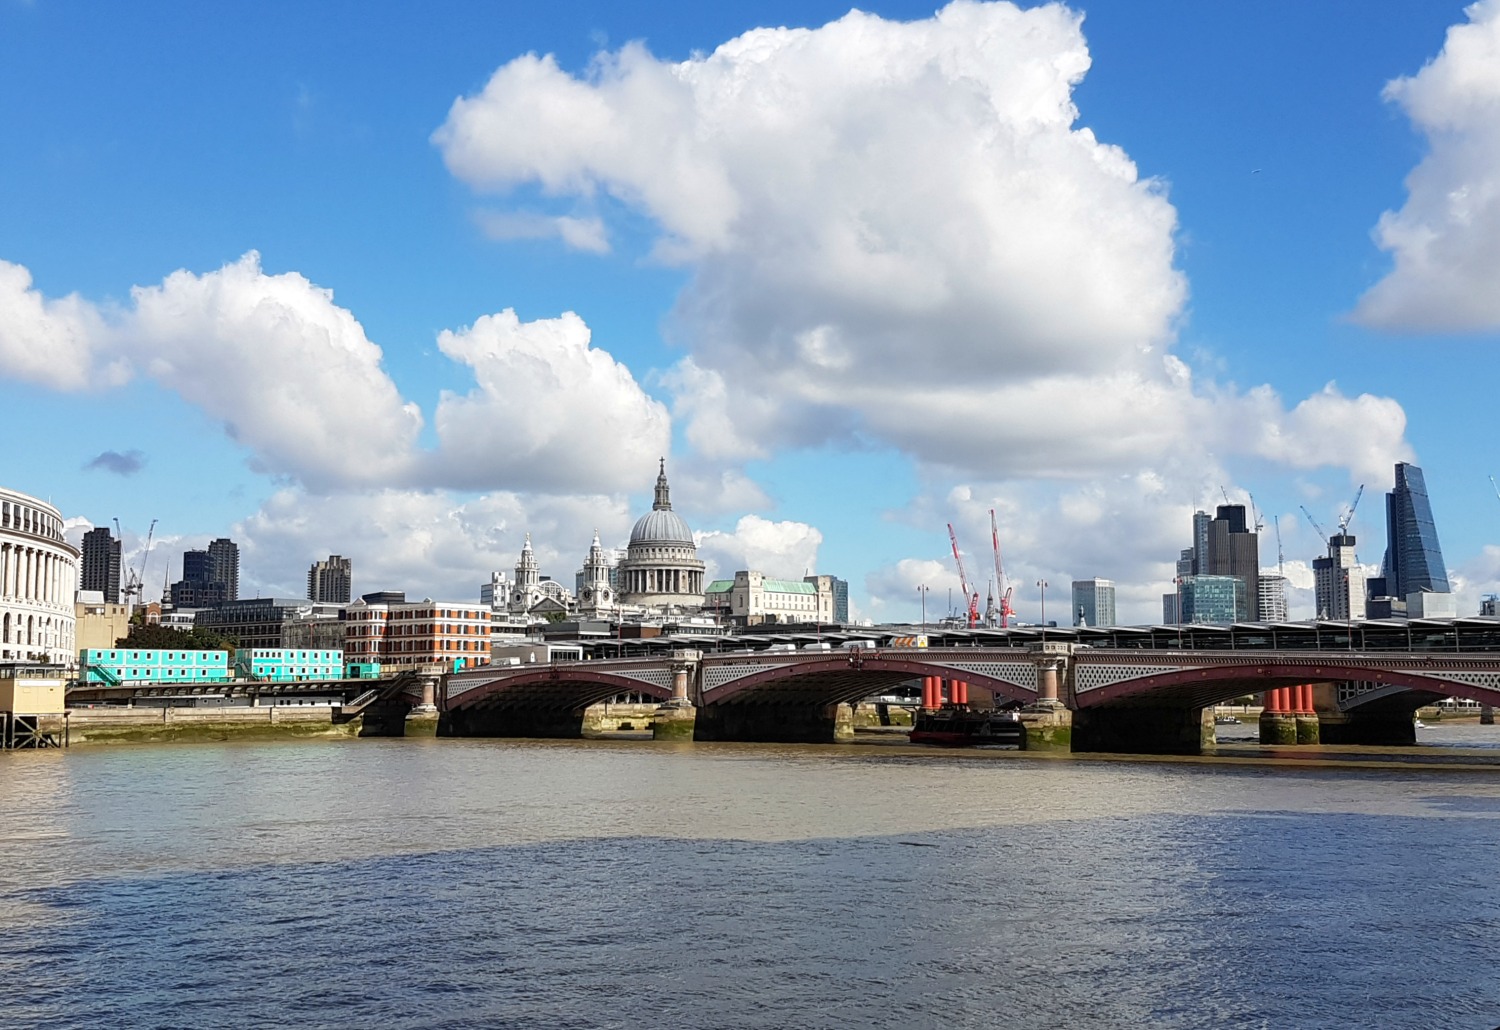 A view along the Thames to the buildings and dome of St Paul's cathedral - my list of the 22 top things to do on the Thames, London with kids or without